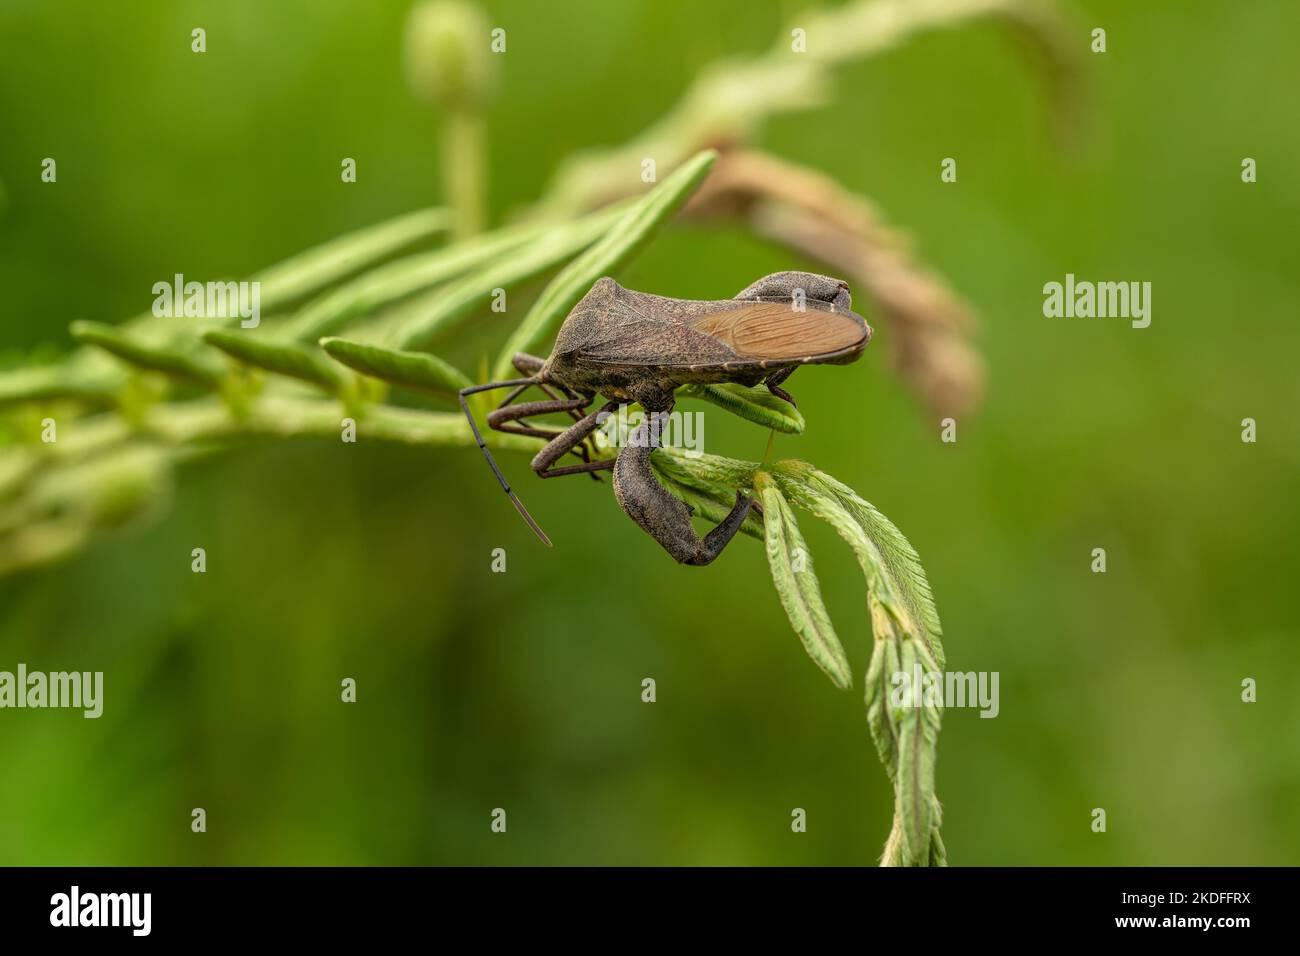 A pest animal named Arilus cristatus who is hanging on the tip of a green leaf, has a blurry green foliage background Stock Photo